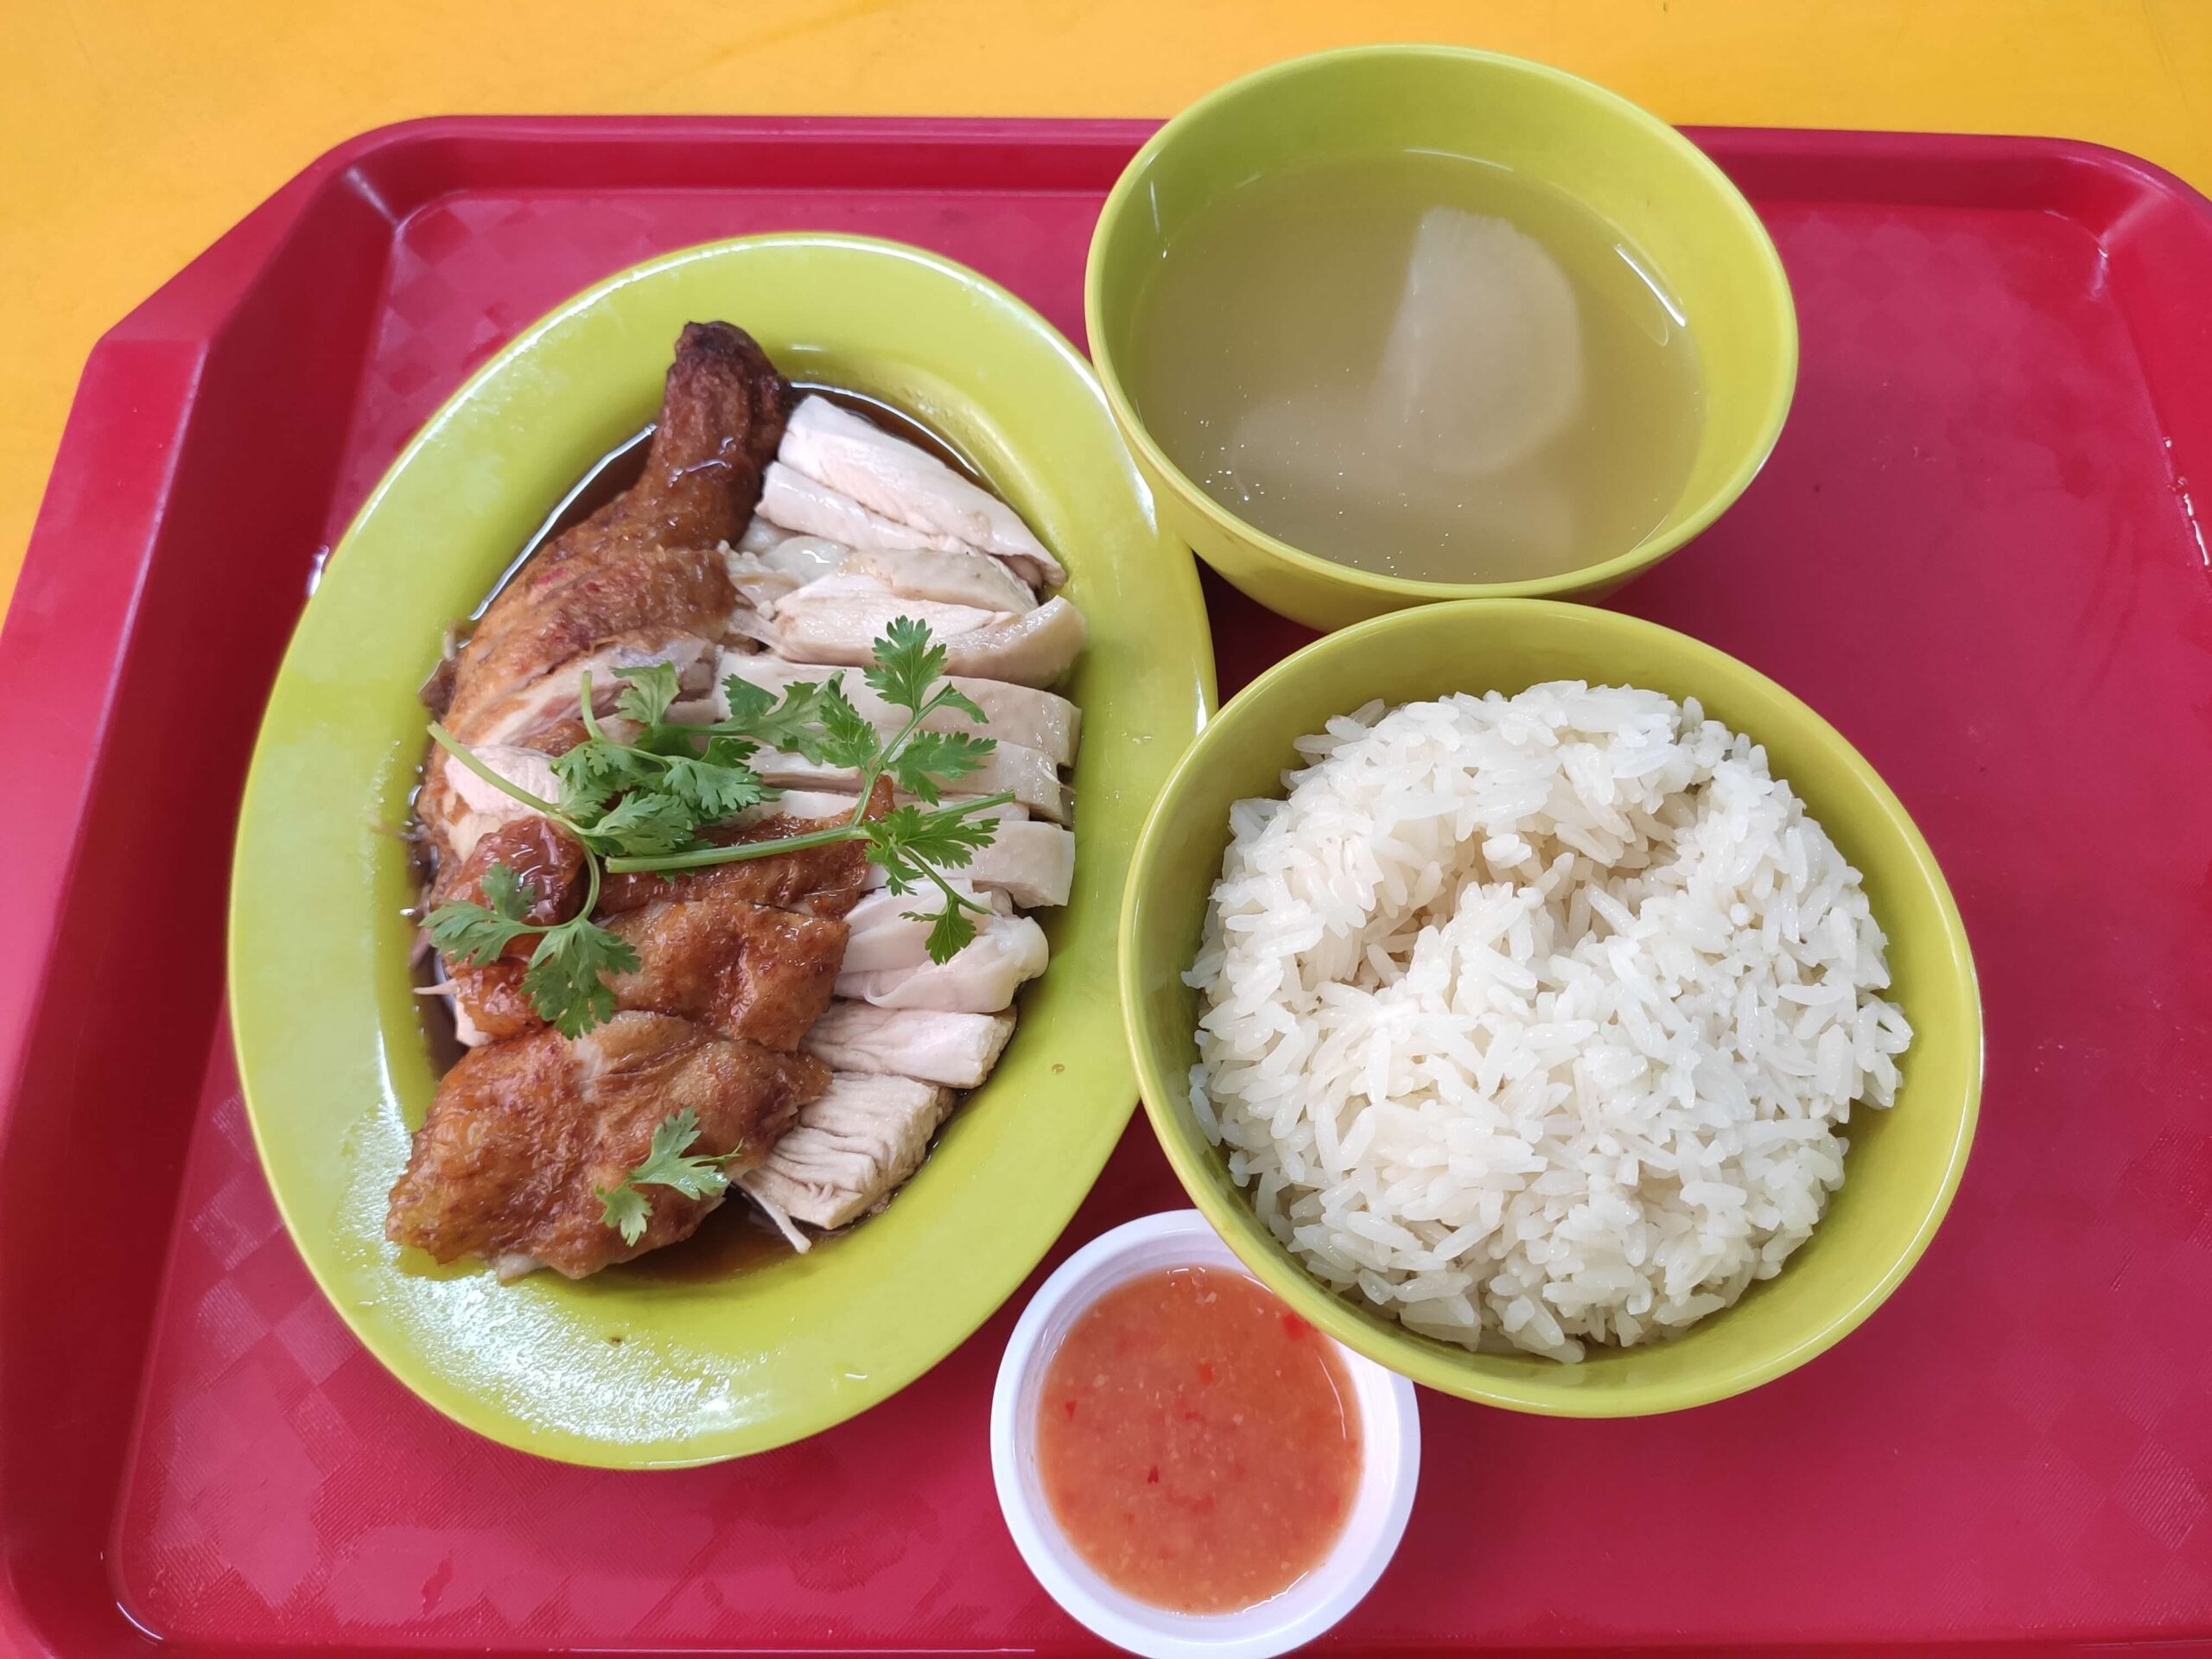 Dong Dong Hainanese Chicken Rice: Roast Chicken, Hainanese Chicken, Rice & Soup